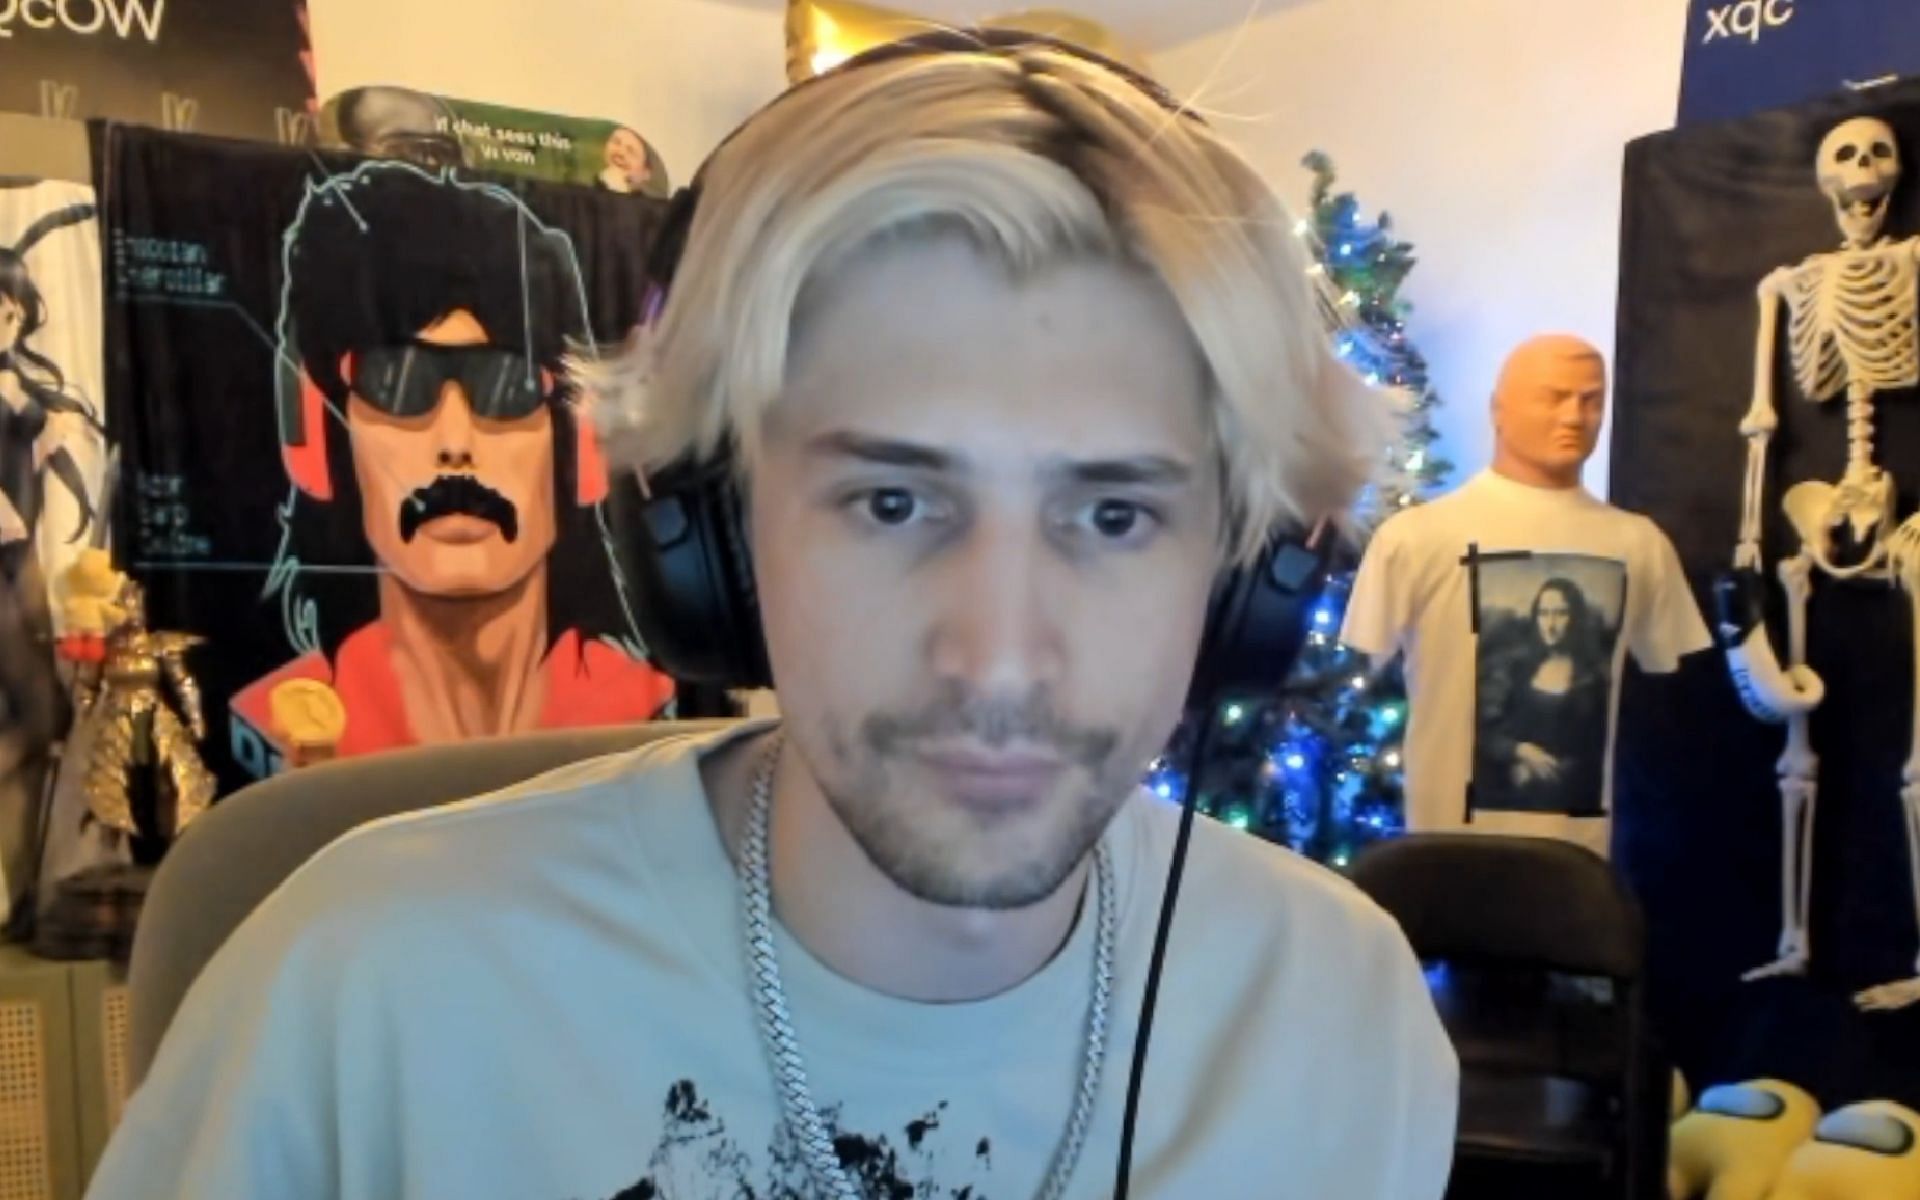 xQc claims that he needed to deal with &quot;something important&quot; before ending November 23 livestream (Image via xQc/Twitch)